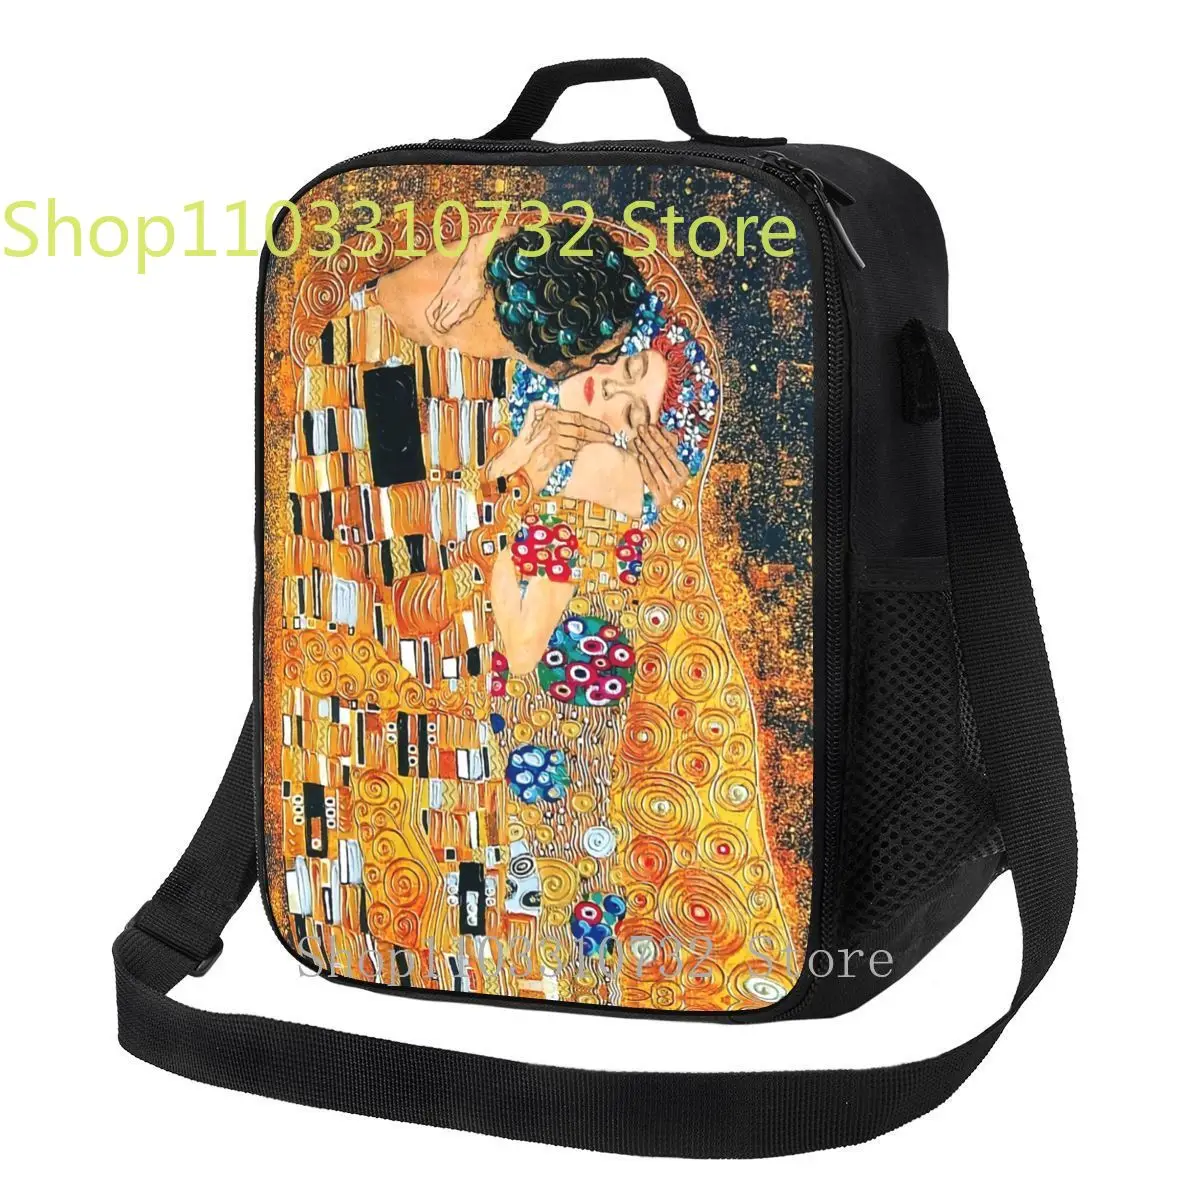 

Gustav Klimt The Kiss Insulated Lunch Tote Bag Women Gold Colorful Painting Art Resuable Cooler Thermal Food Lunch Box School